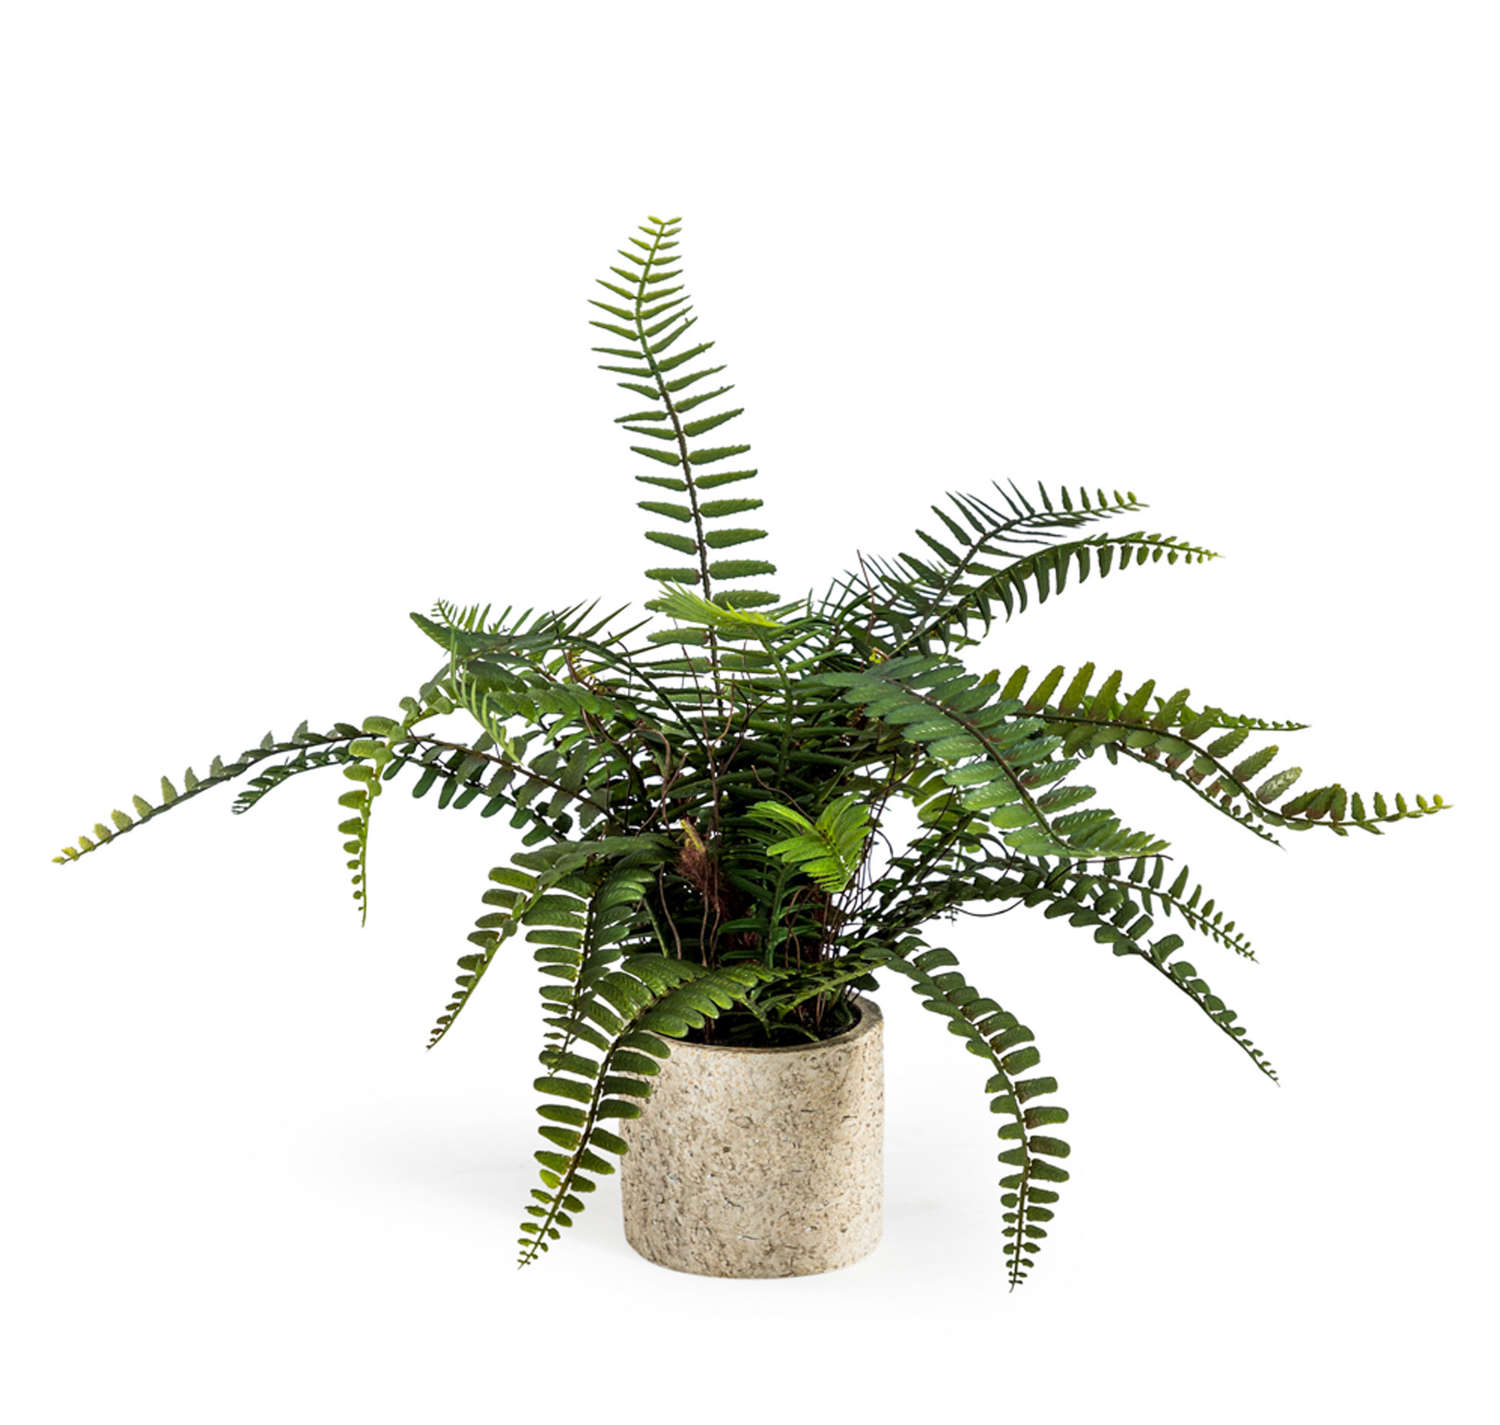 Potted Fern plant